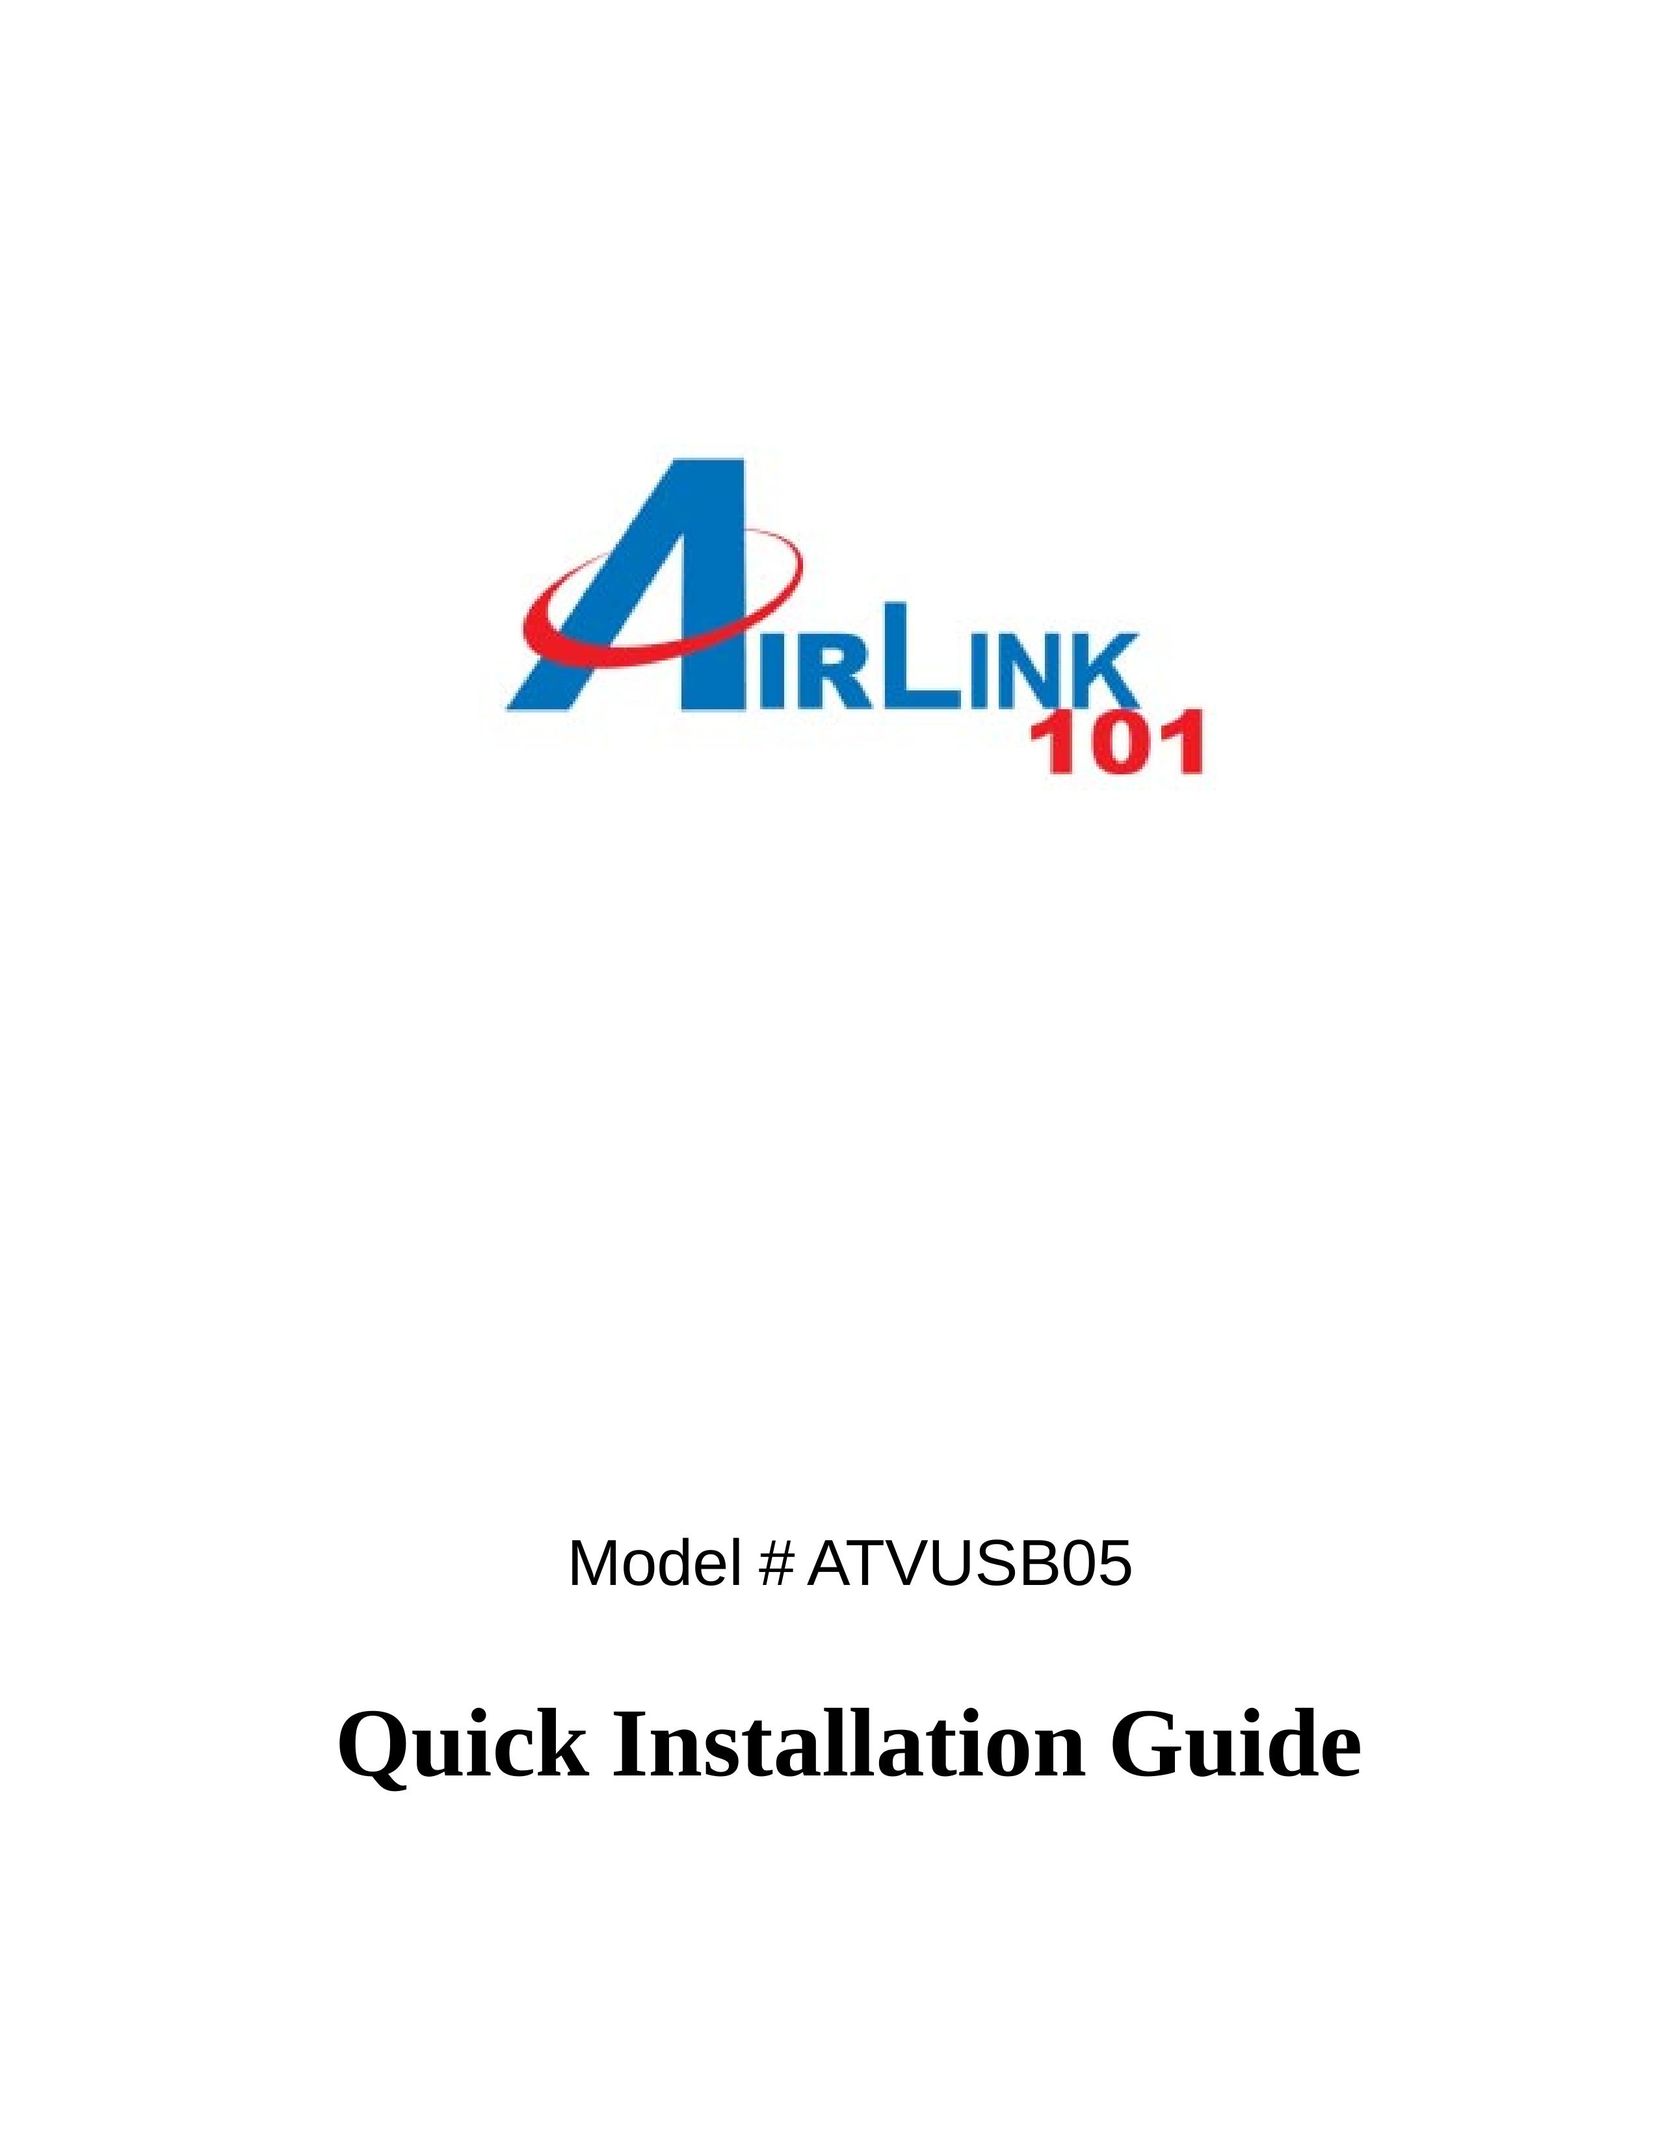 Airlink101 ATVUSB05 Cable Box User Manual